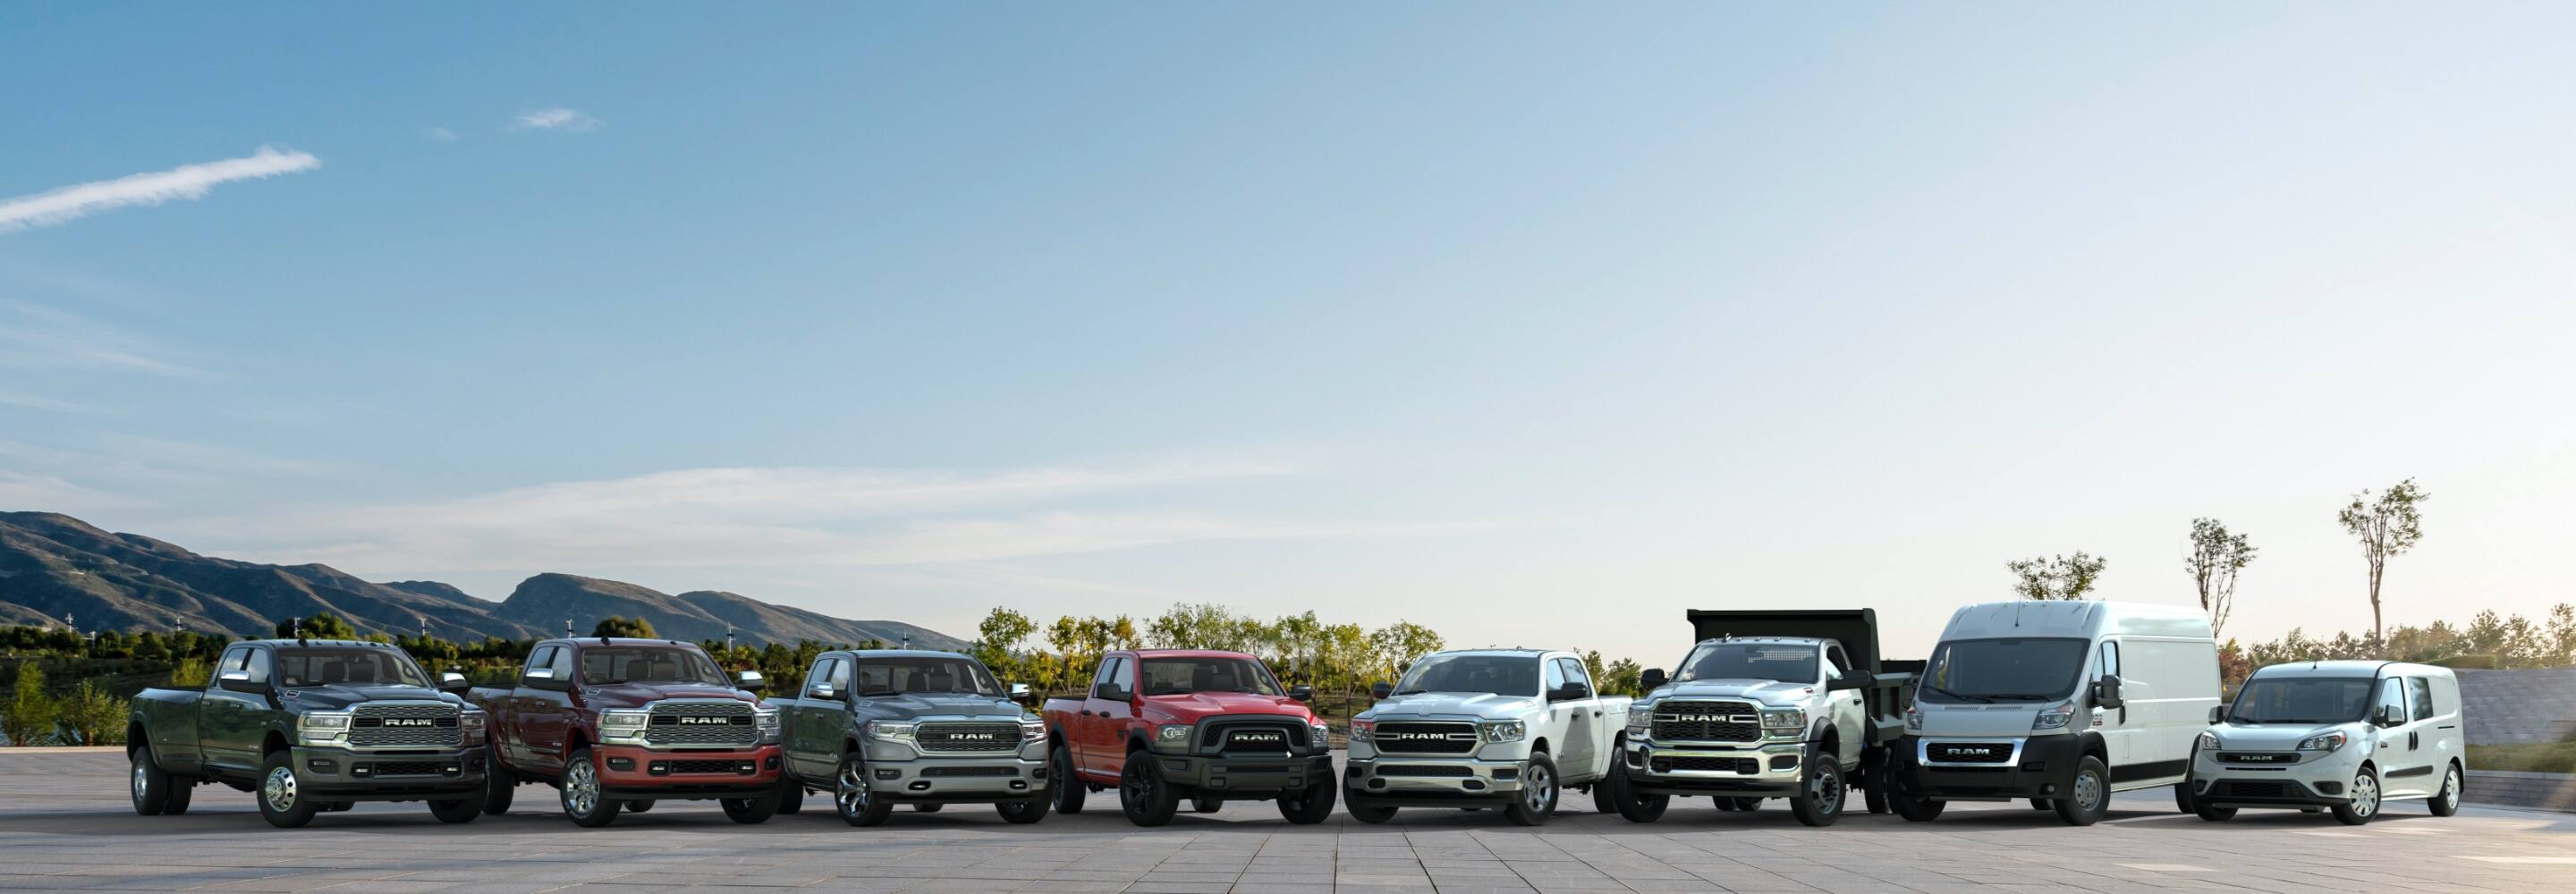 A group of 2021 Ram Brand vehicles, from left to right: three Ram Limited models-a 3500, 2500 and 1500, Ram 1500 Classic Warlock, two Tradesman models-a Ram 1500 and Chassis Cab 5500-both with the Chrome Appearance Package, a Ram ProMaster 2500 Cargo Van and Ram ProMaster City Passenger Wagon.